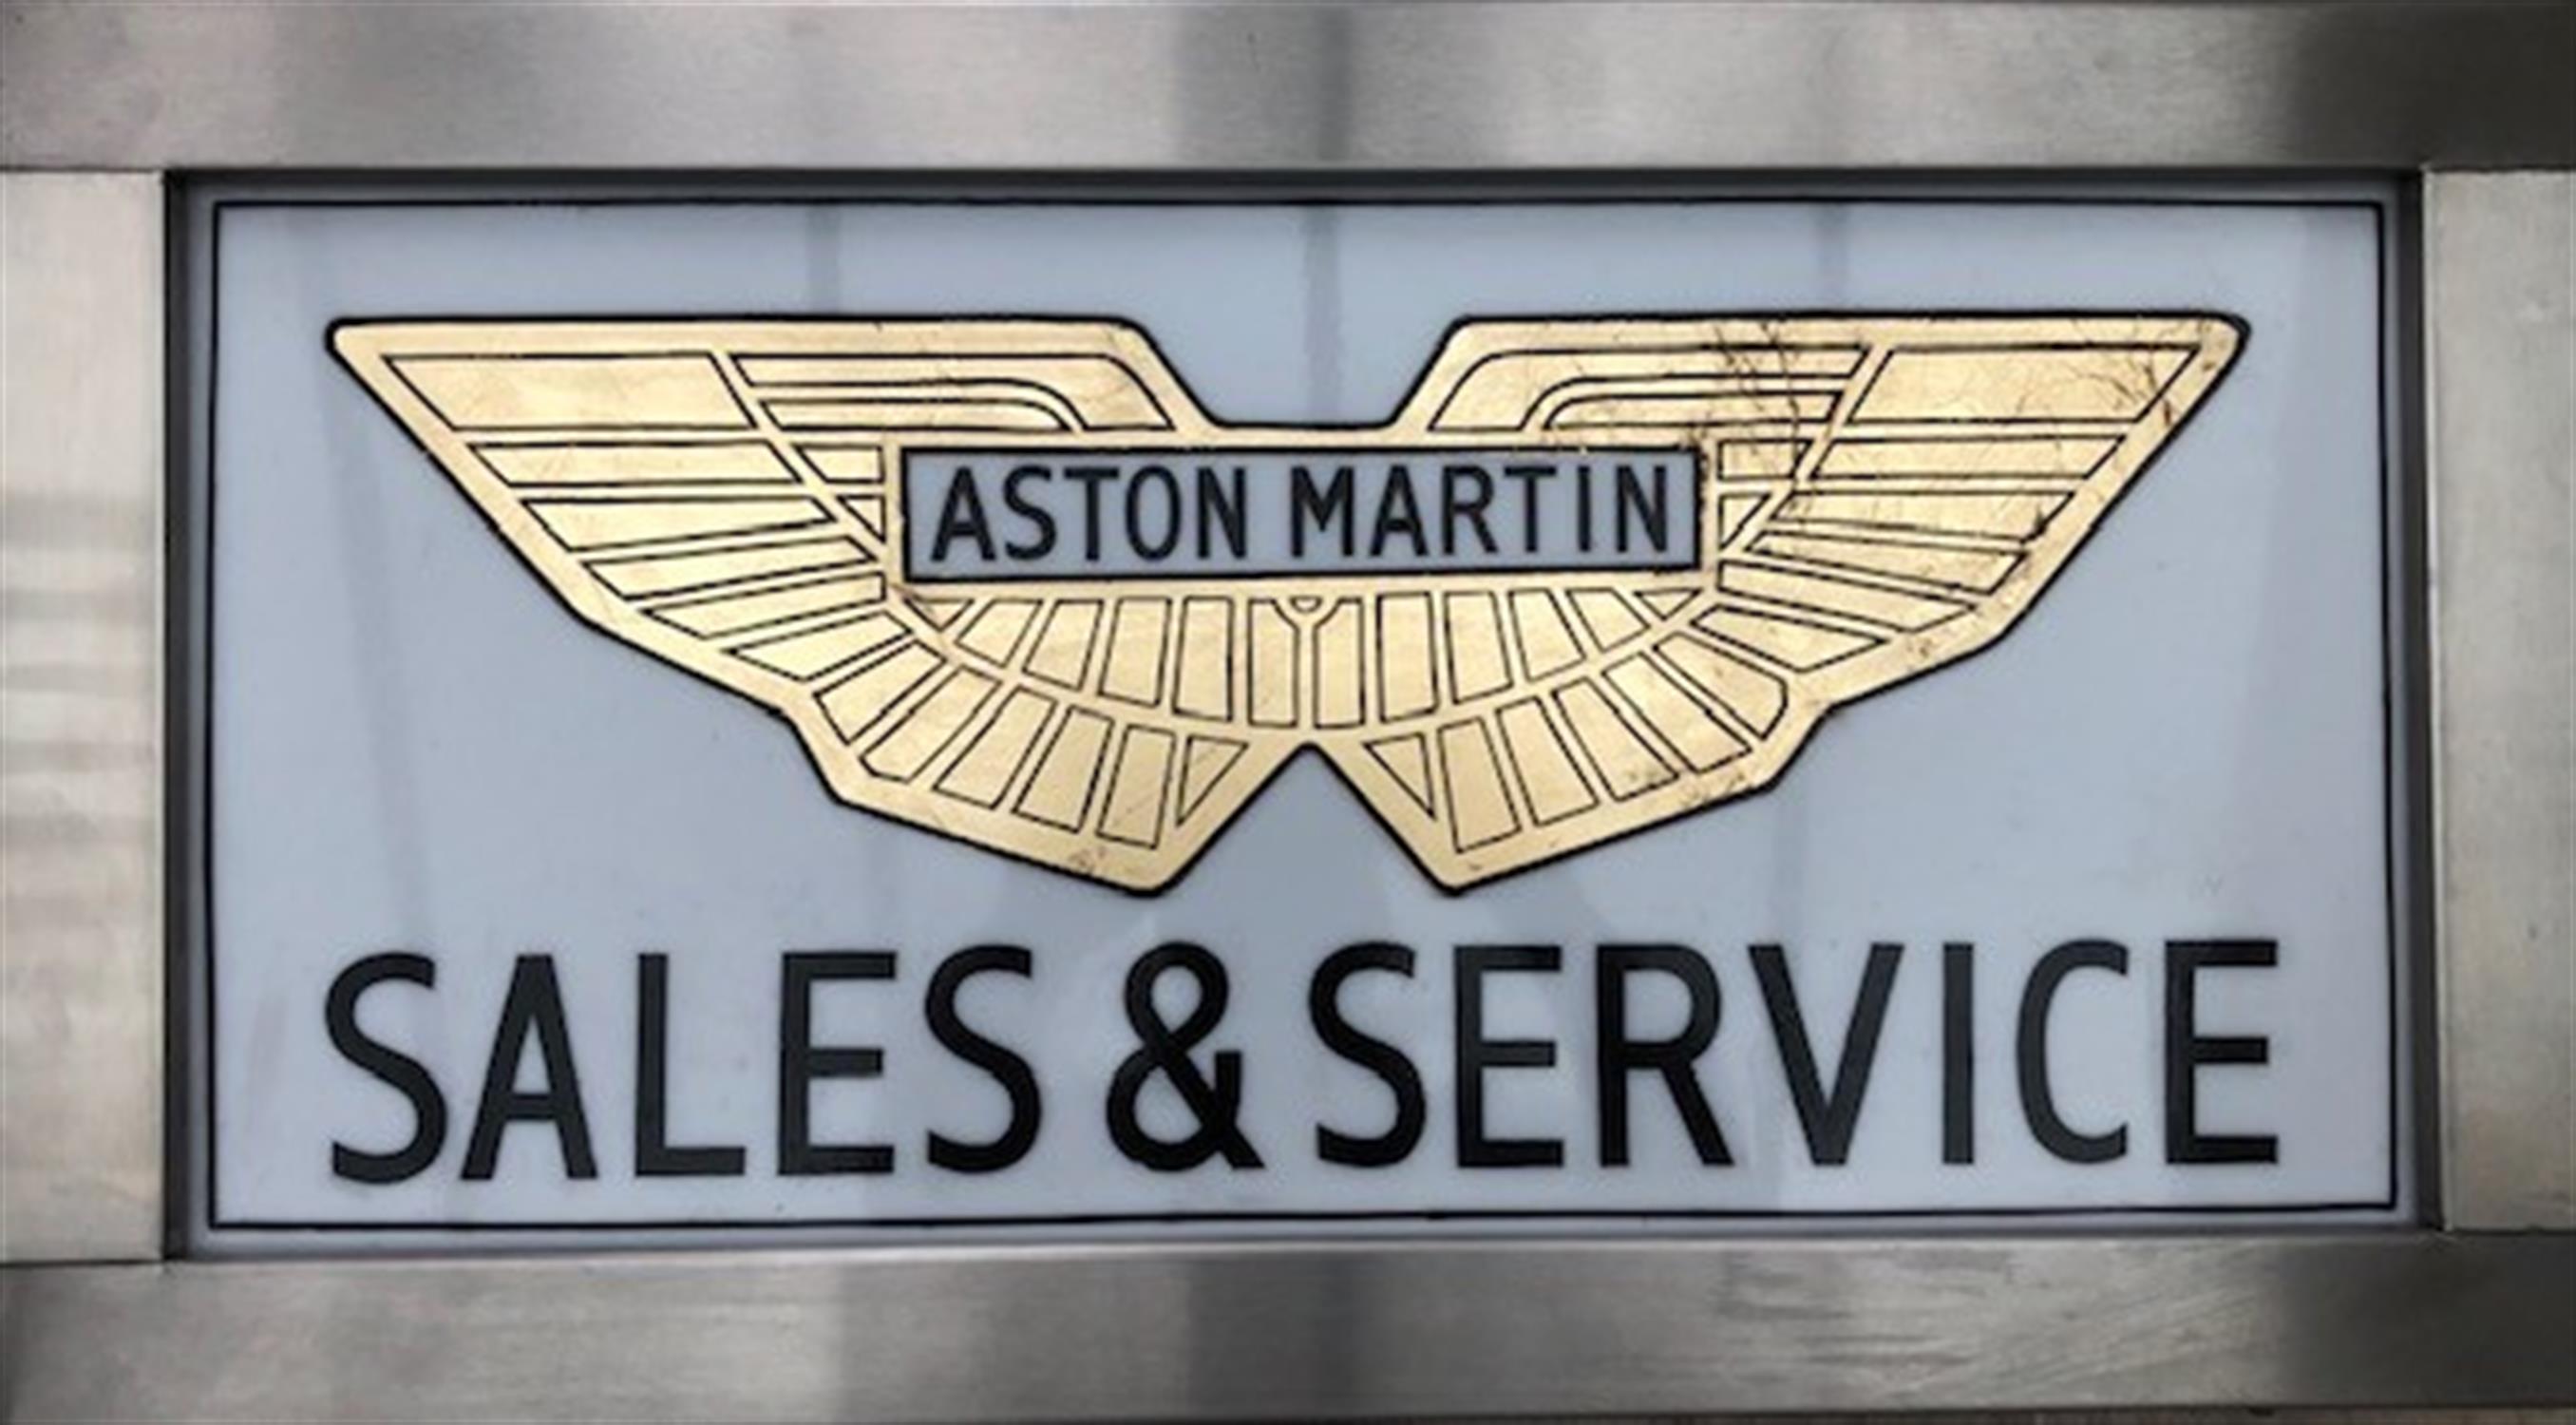 A rare sign-written Aston Martin 'Sales & Service' Dealership-Type Advertising Back-Lit Box Sign. - Image 2 of 4